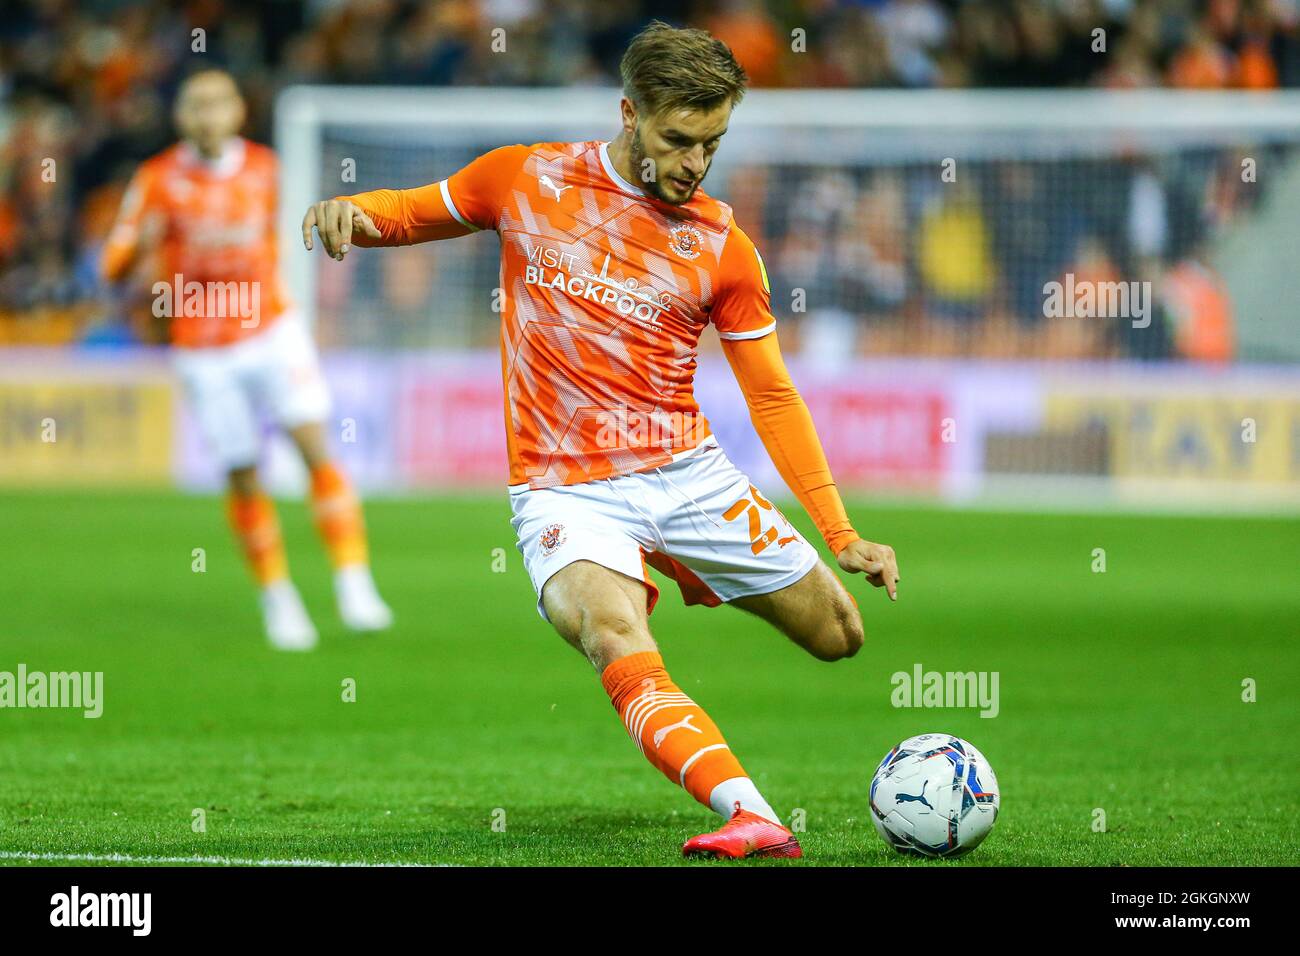 Blackpool, UK. 14th Sep, 2021. Blackpool defender Luke Garbutt during the Sky Bet Championship match between Blackpool and Huddersfield Town at Bloomfield Road, Blackpool, England on 14 September 2021. Photo by Sam Fielding. Credit: PRiME Media Images/Alamy Live News Stock Photo